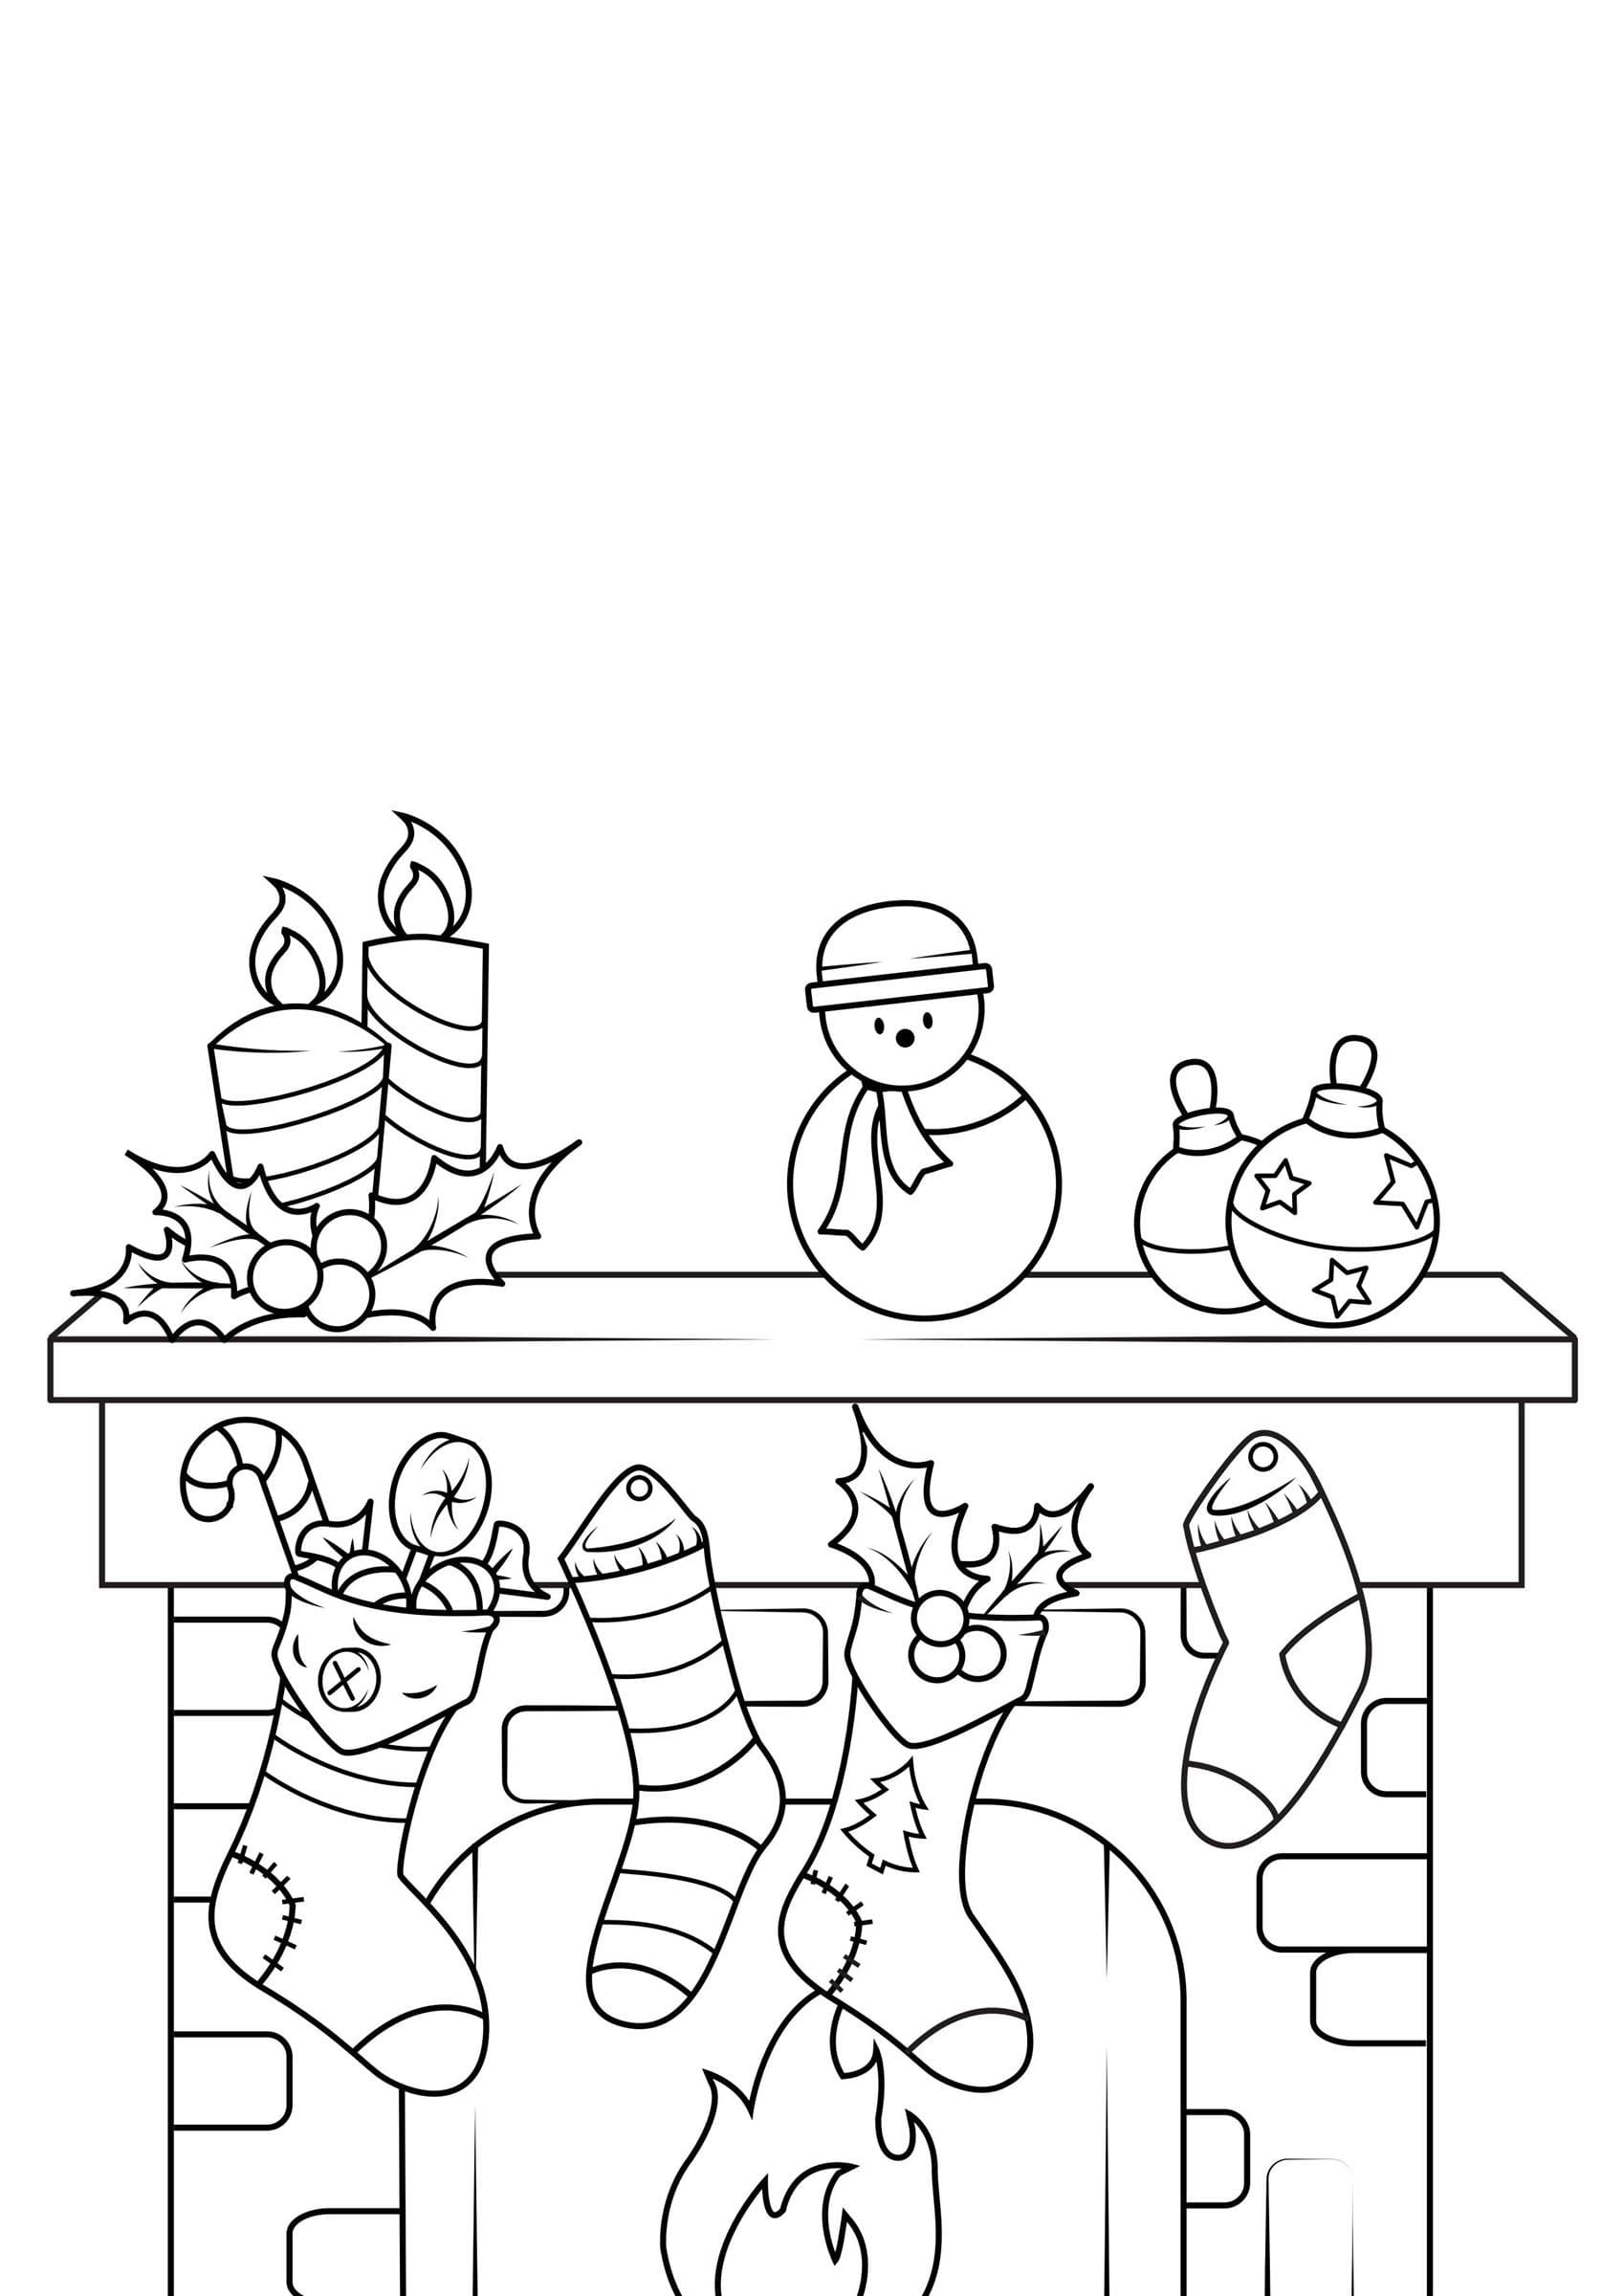 Fireplace With Christmas Attributes